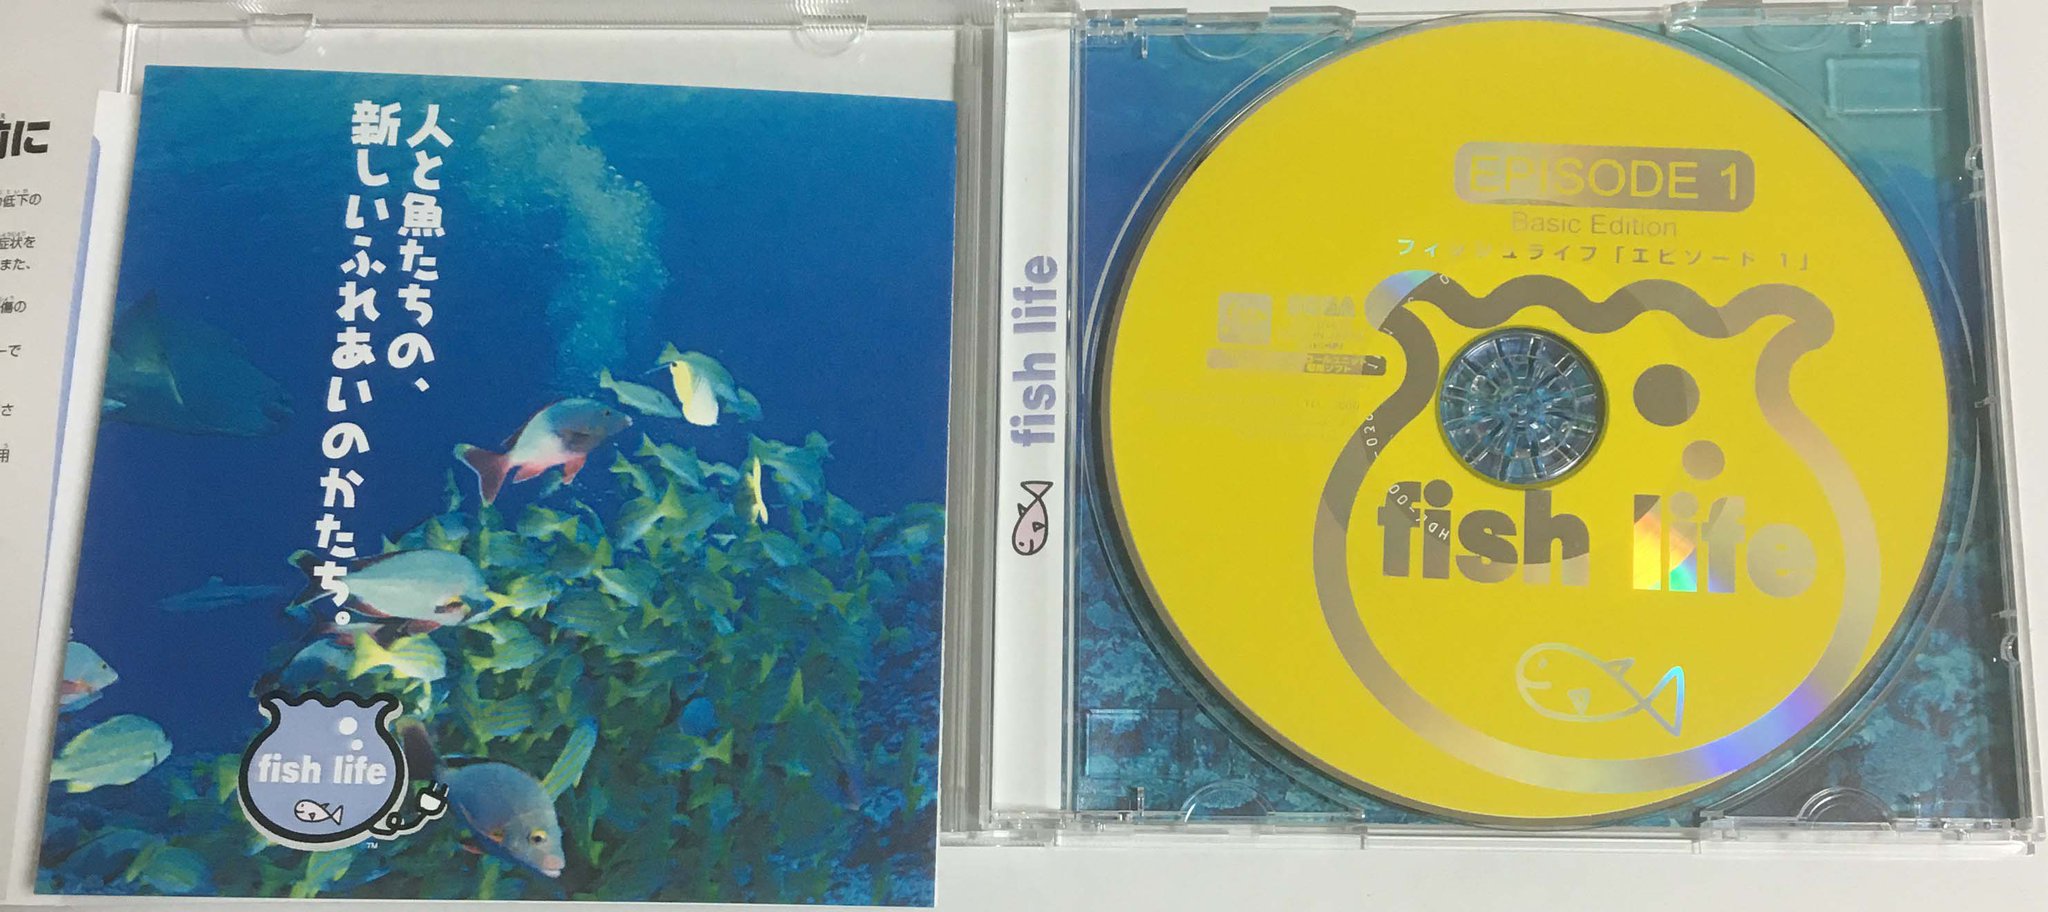 Case and CD for Fish Life Episode 1 Basic Edition